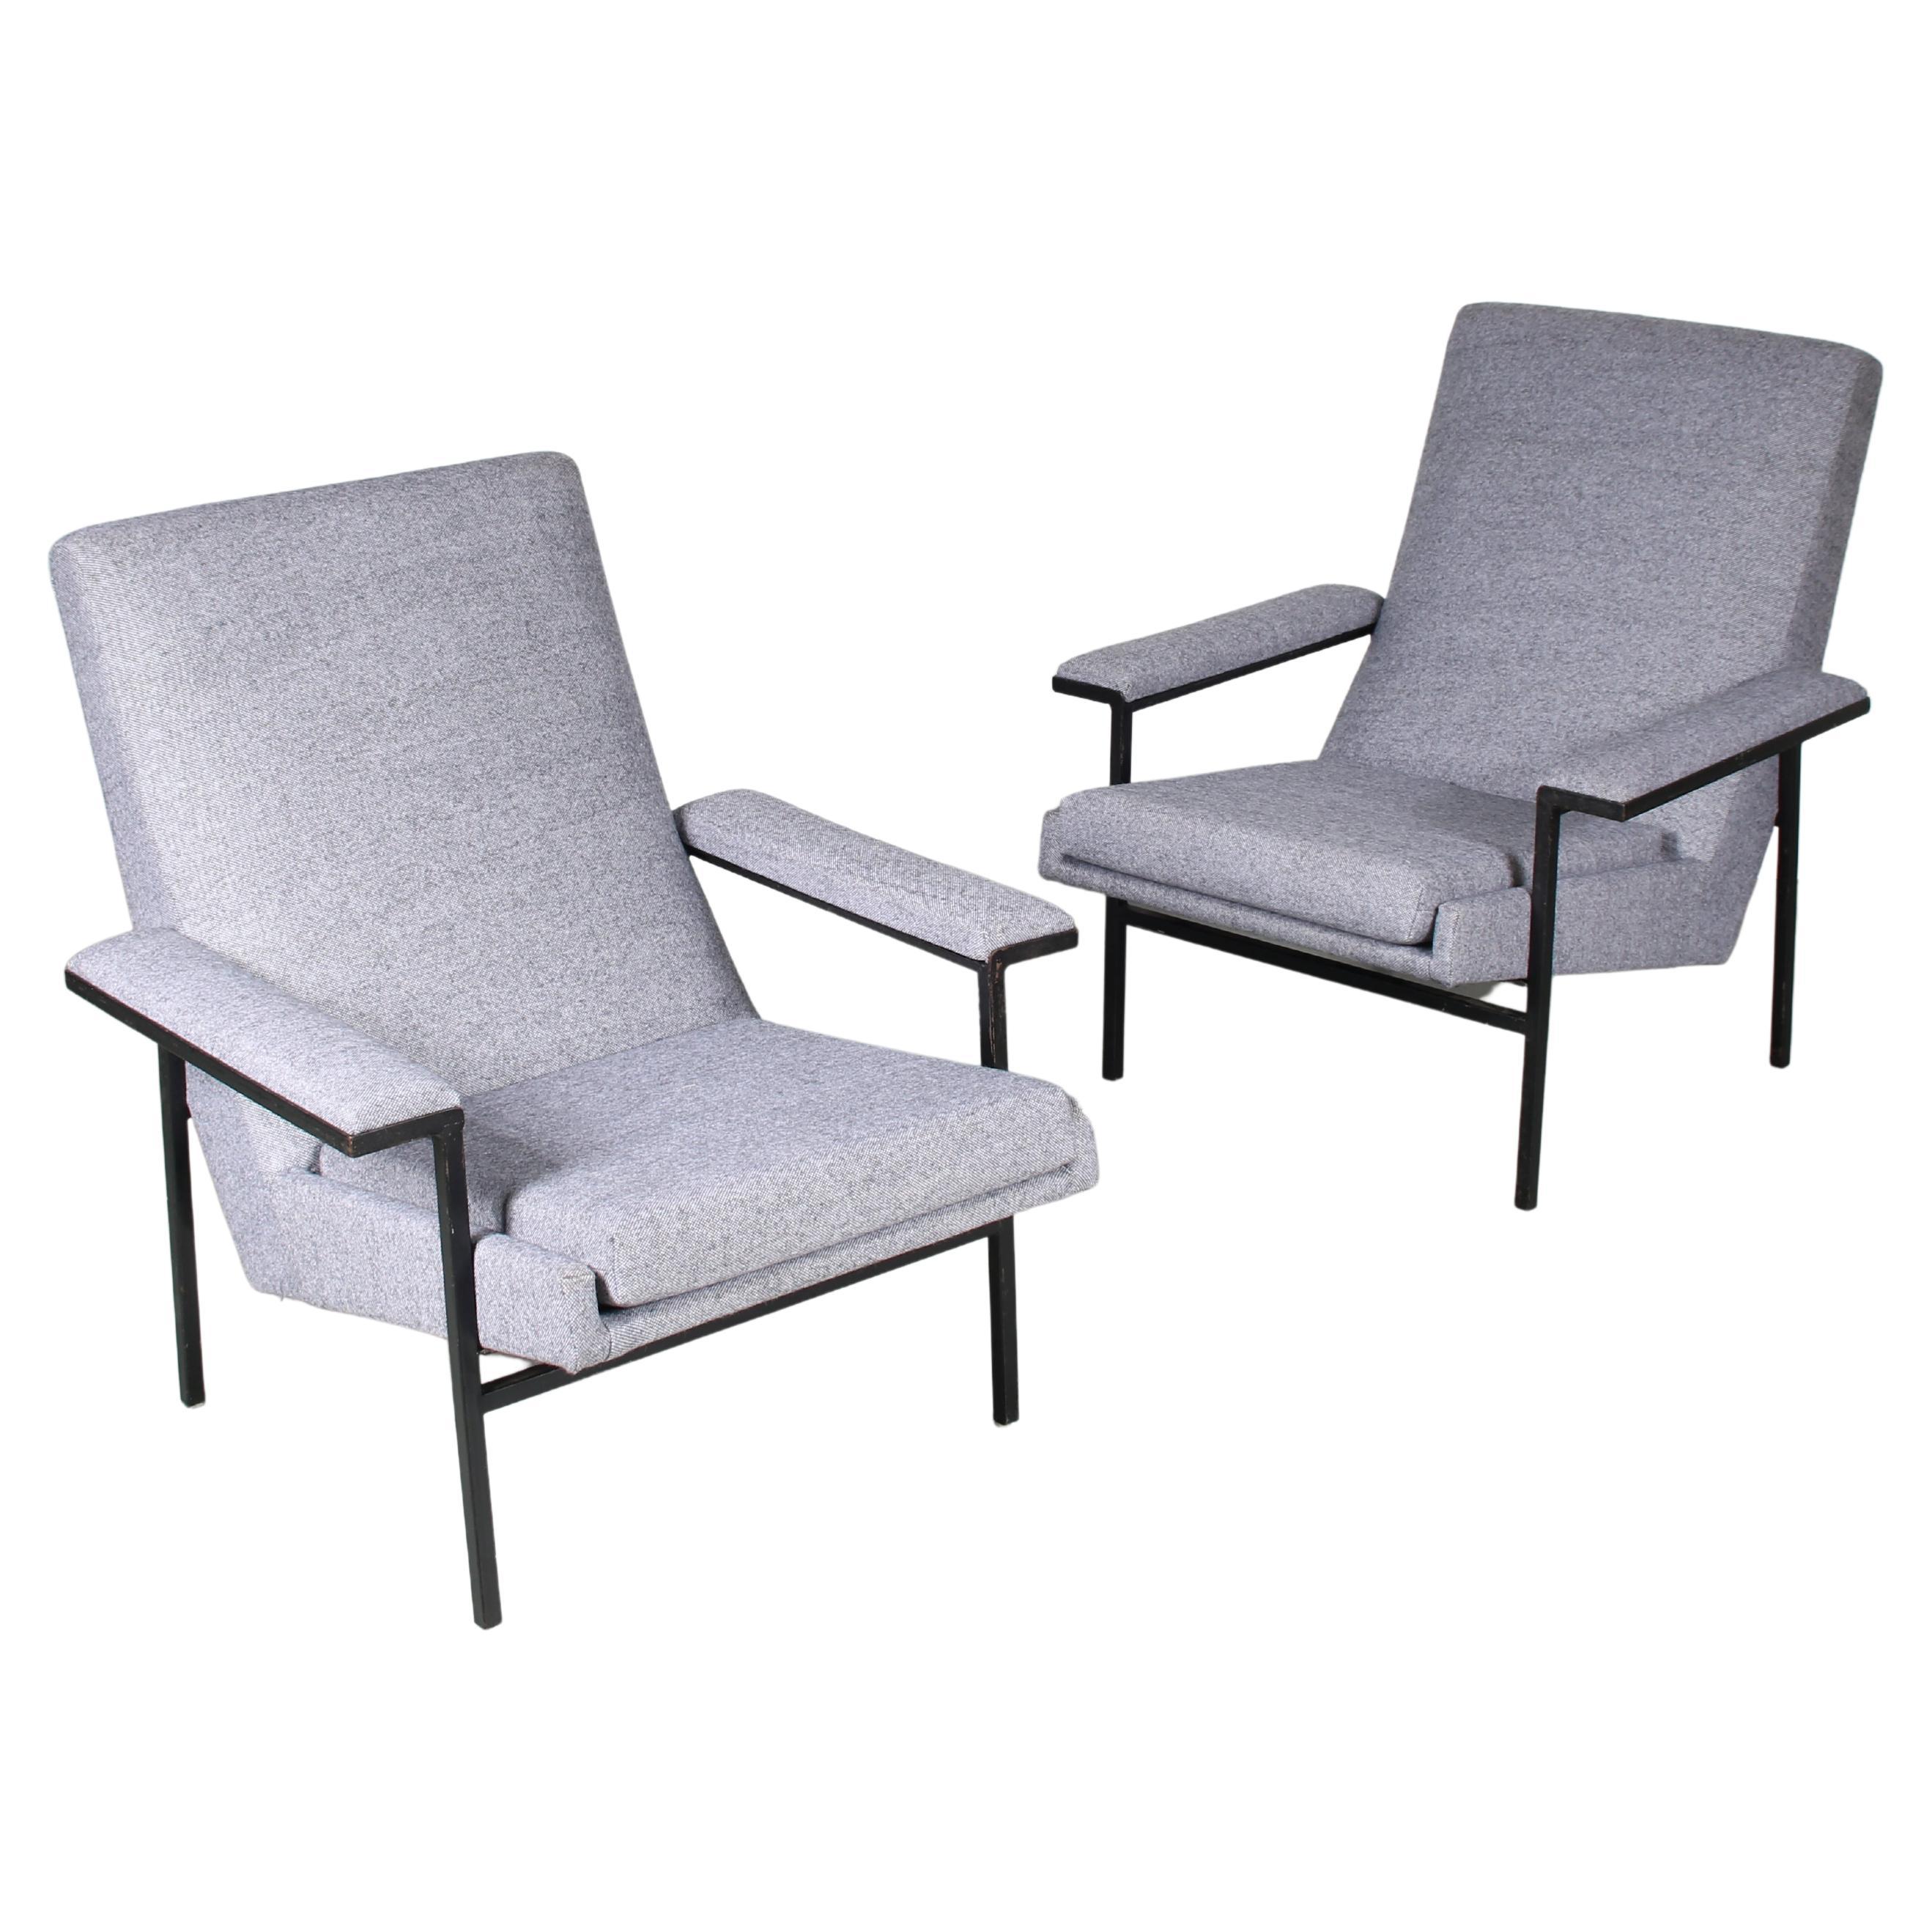 Pair of Arp Chairs by Steiner, France, 1950 For Sale